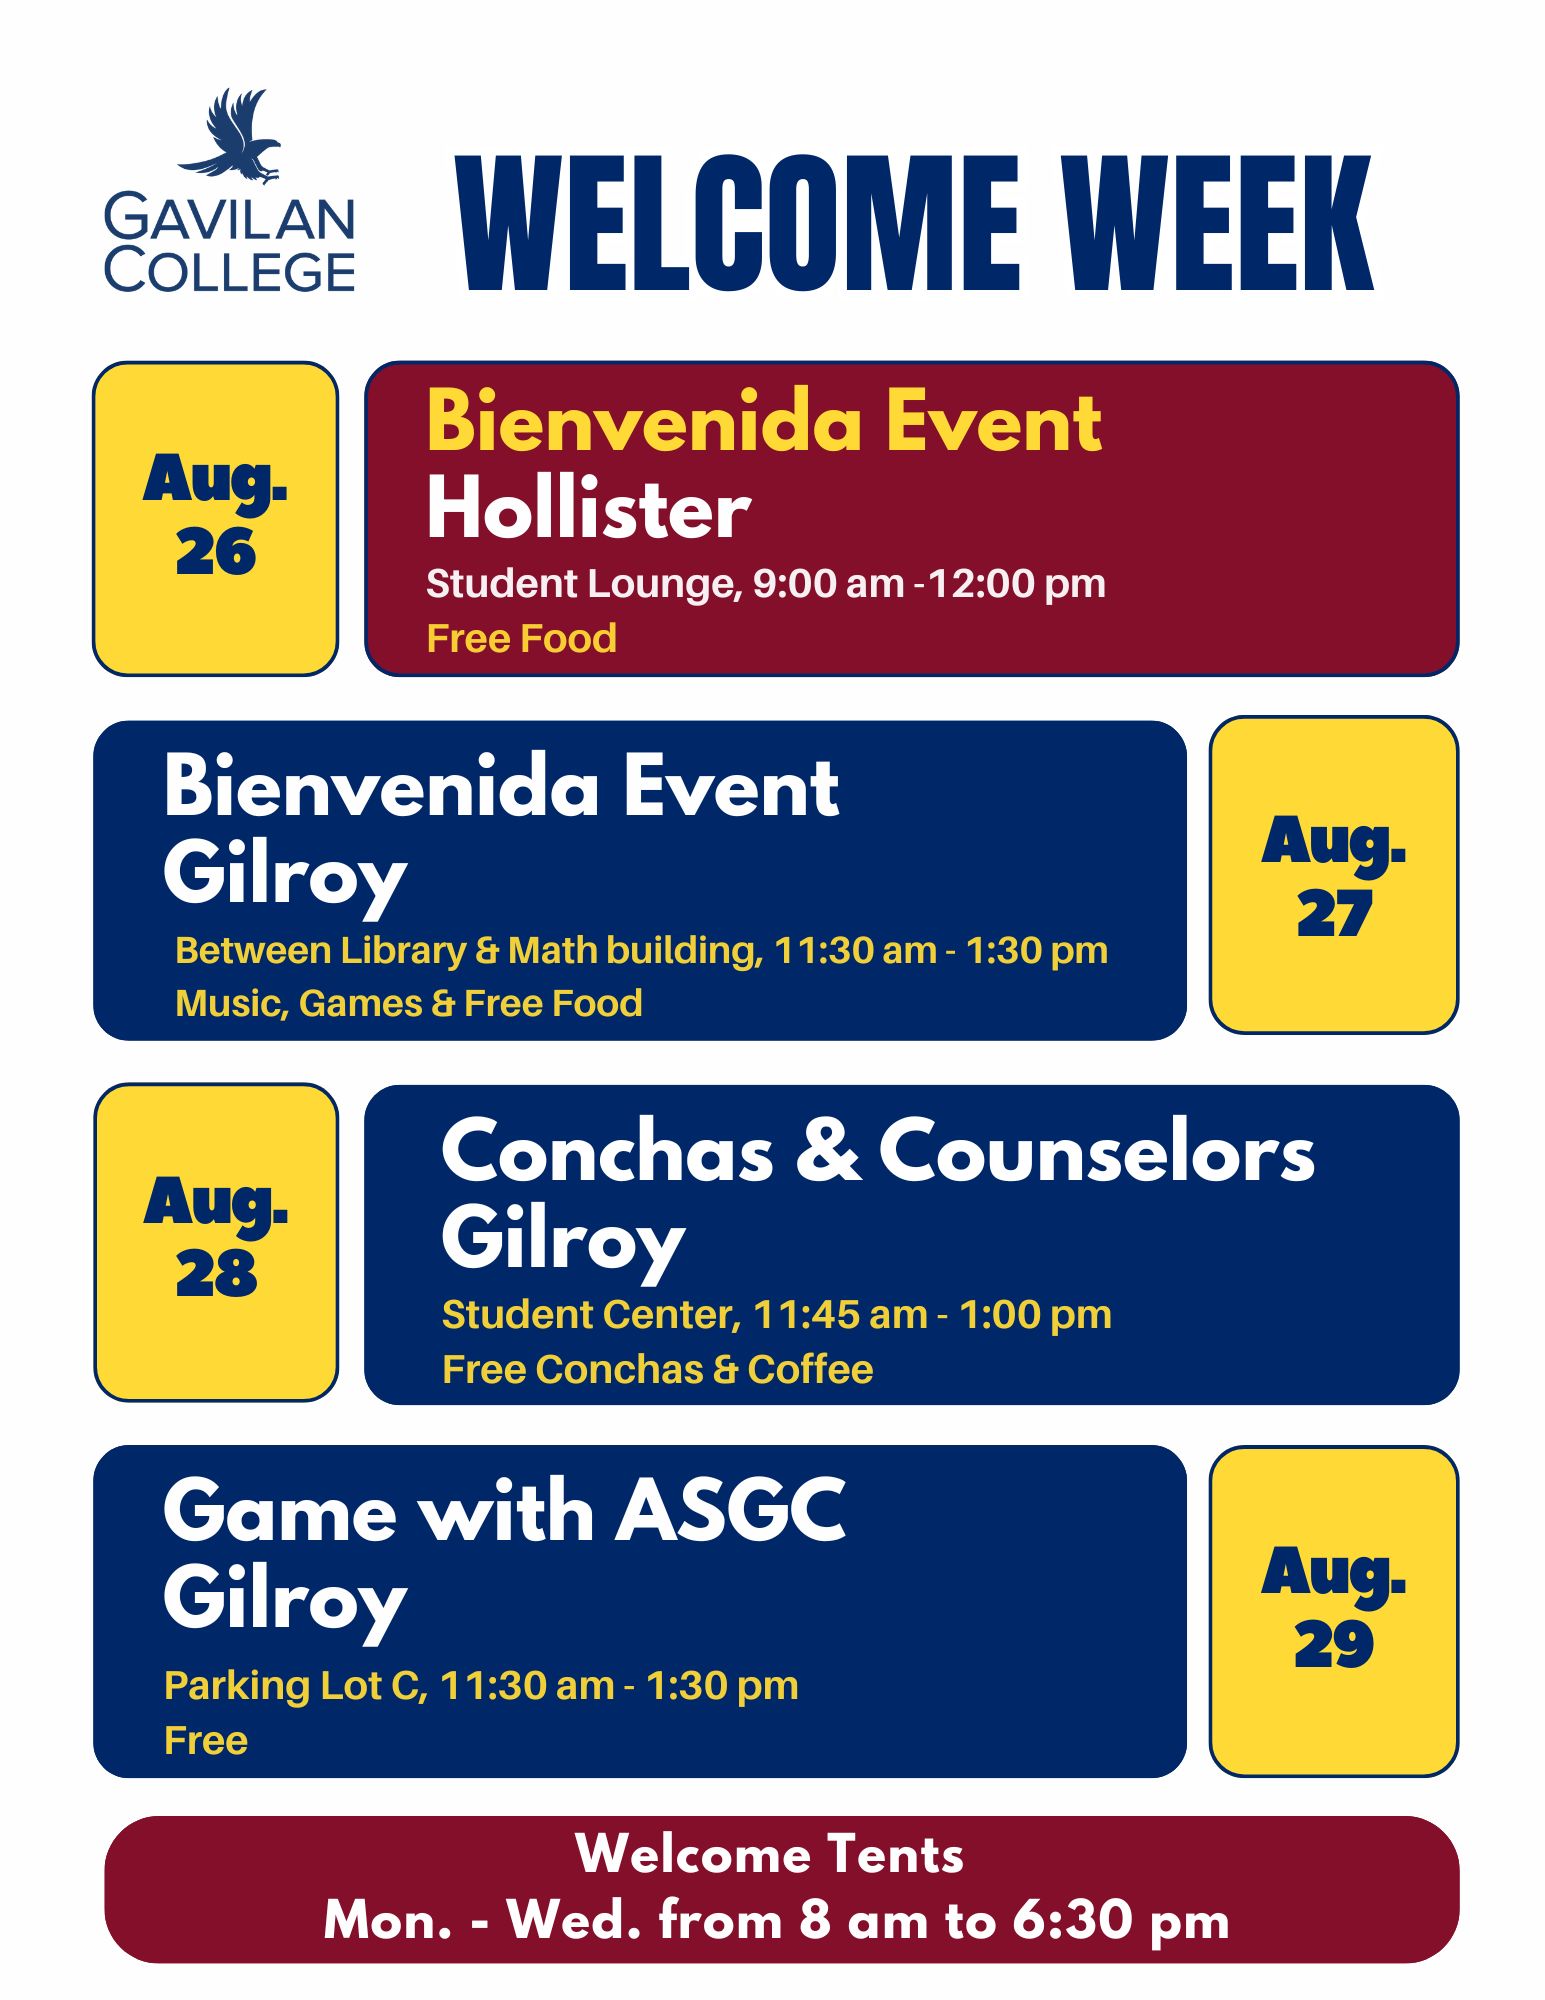 WELCOME WEEK Flyer with all information listed below in red, blue and yellow boxes and the Gavilan College blue hawk logo in the corner